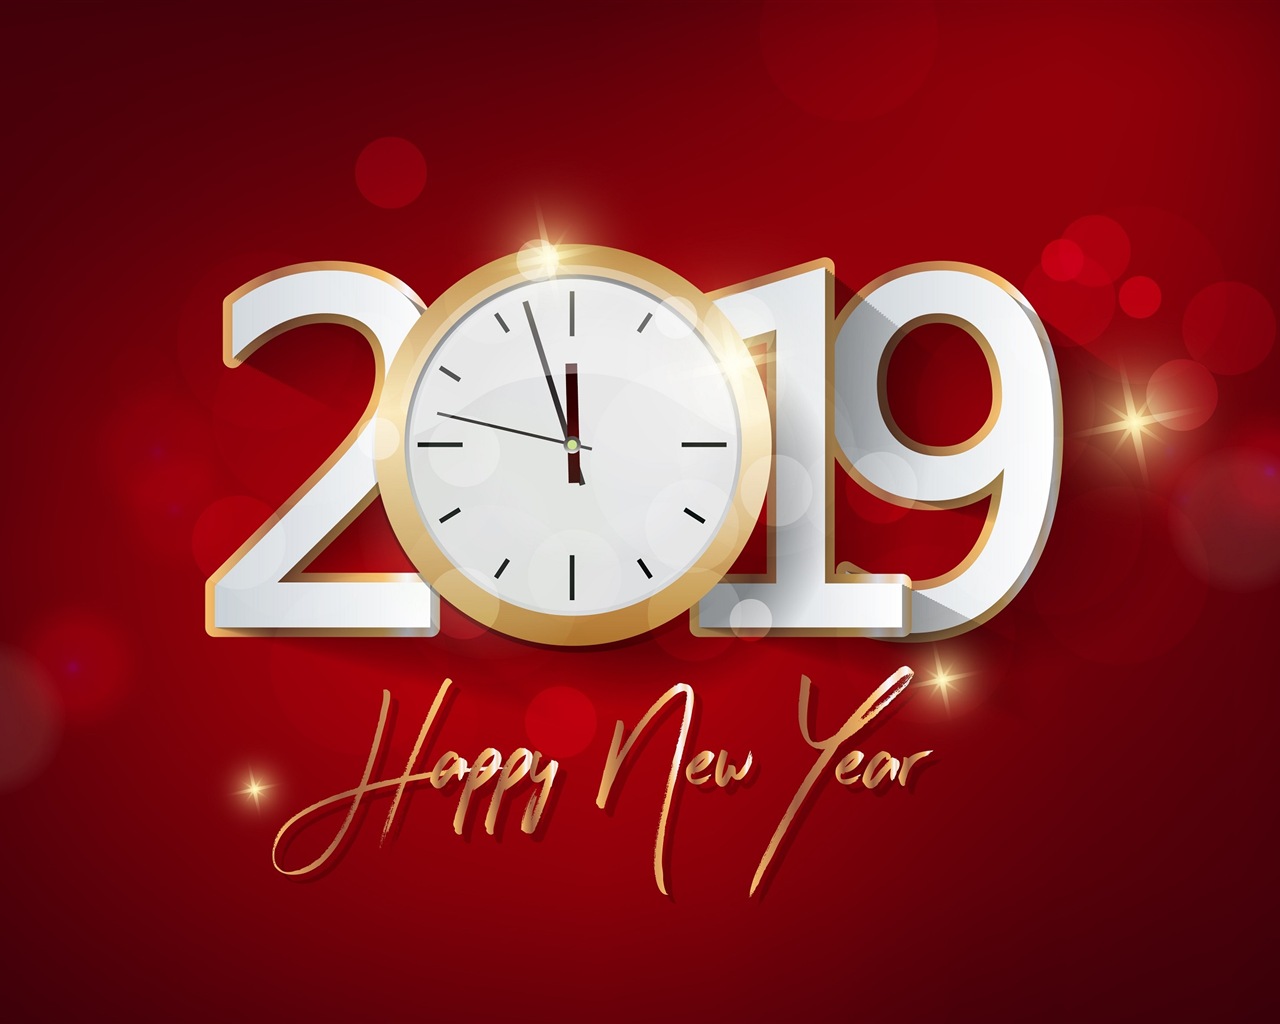 Happy New Year 2019 HD wallpapers #8 - 1280x1024